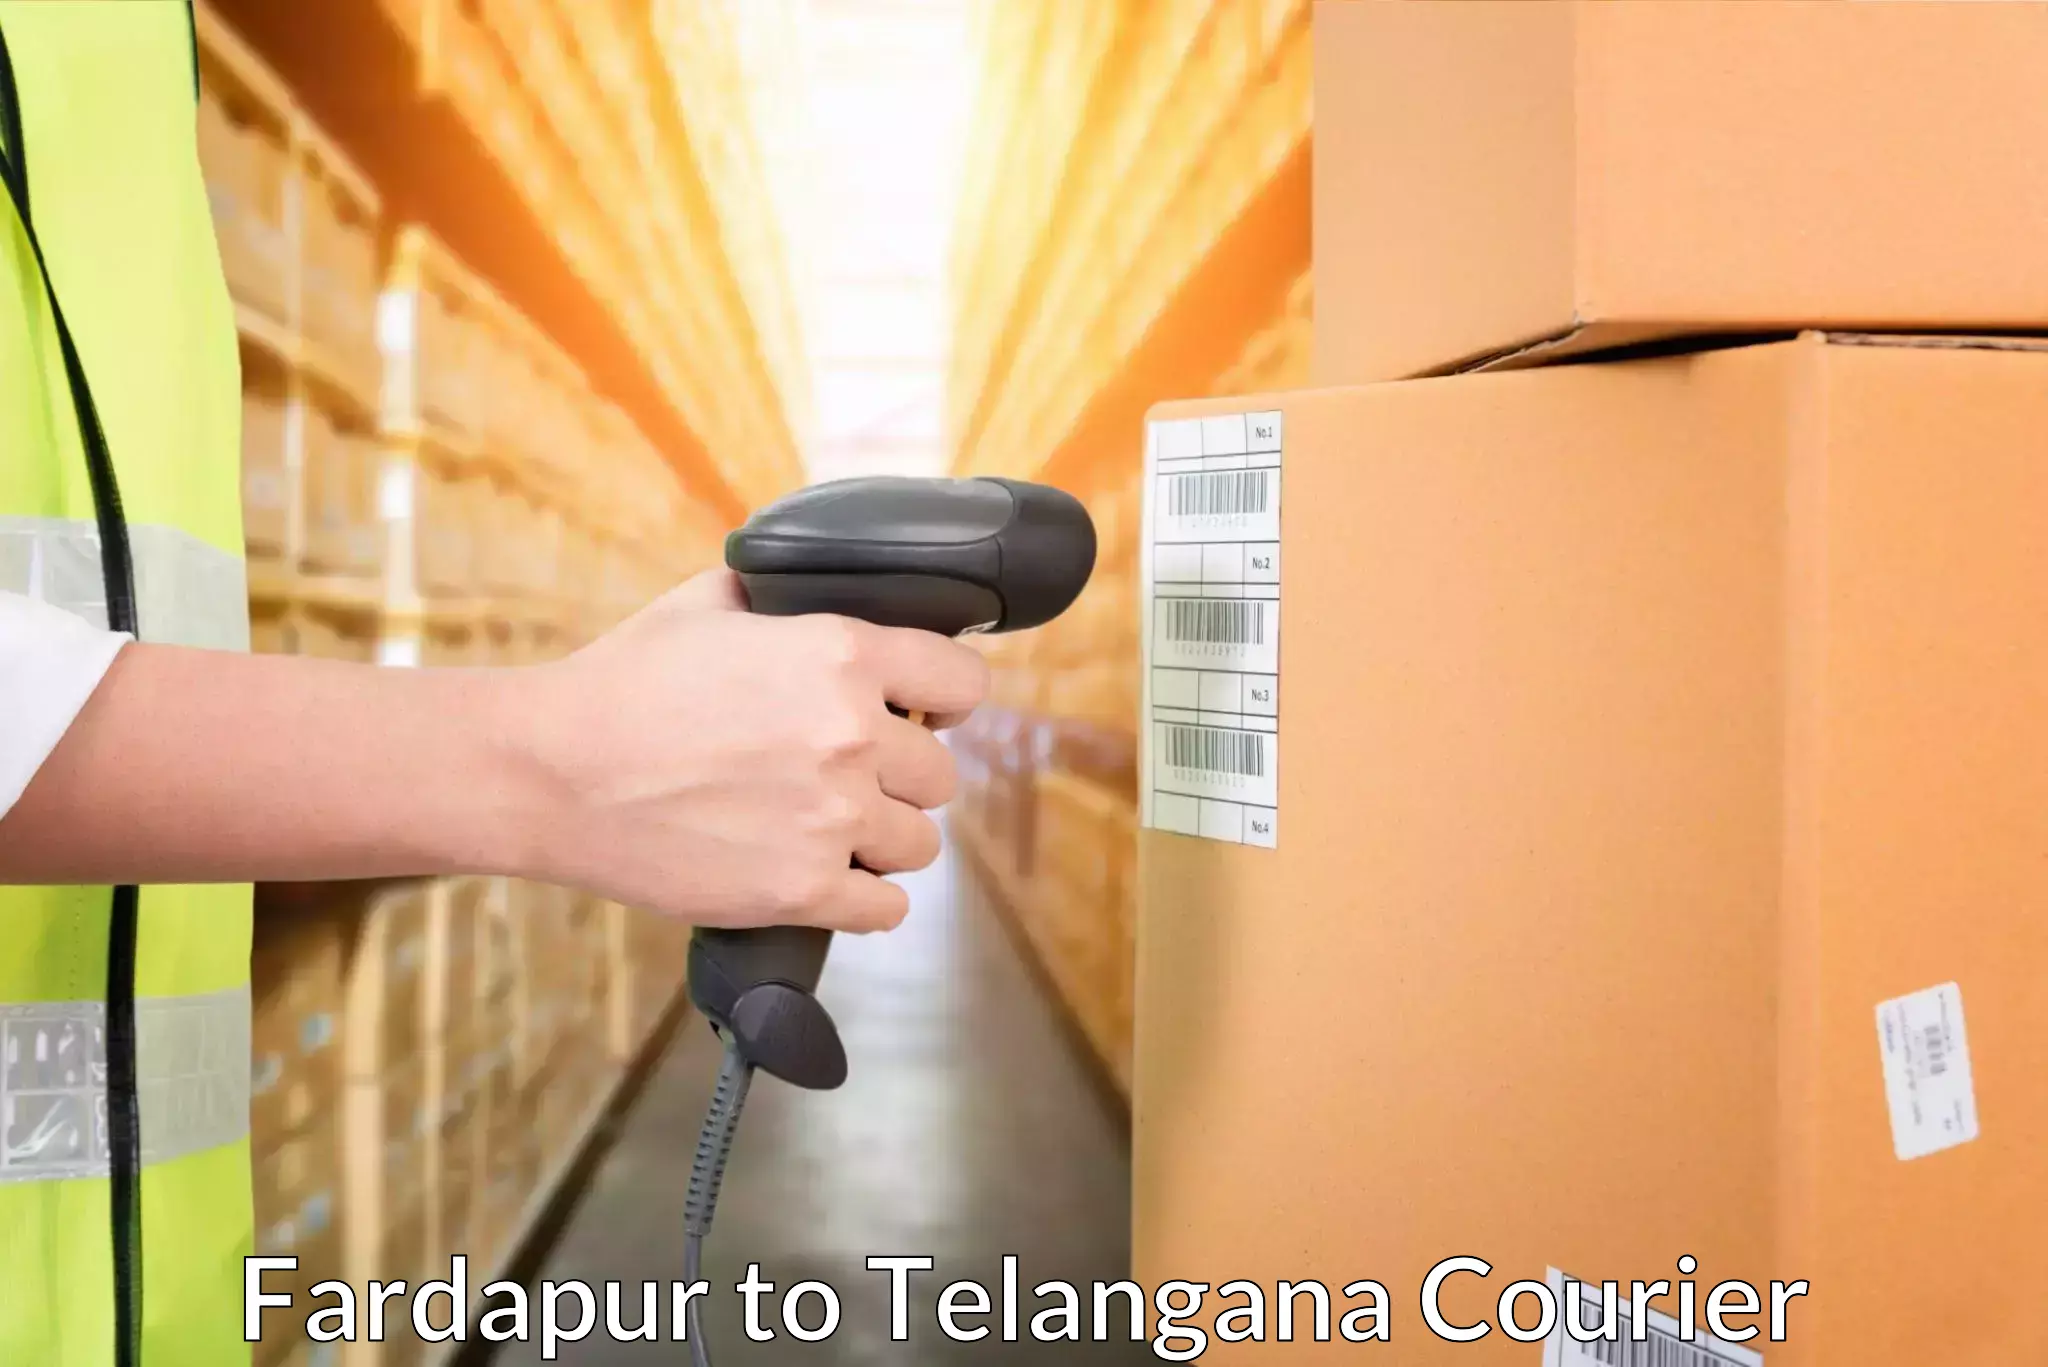 Pharmaceutical courier in Fardapur to Siddipet